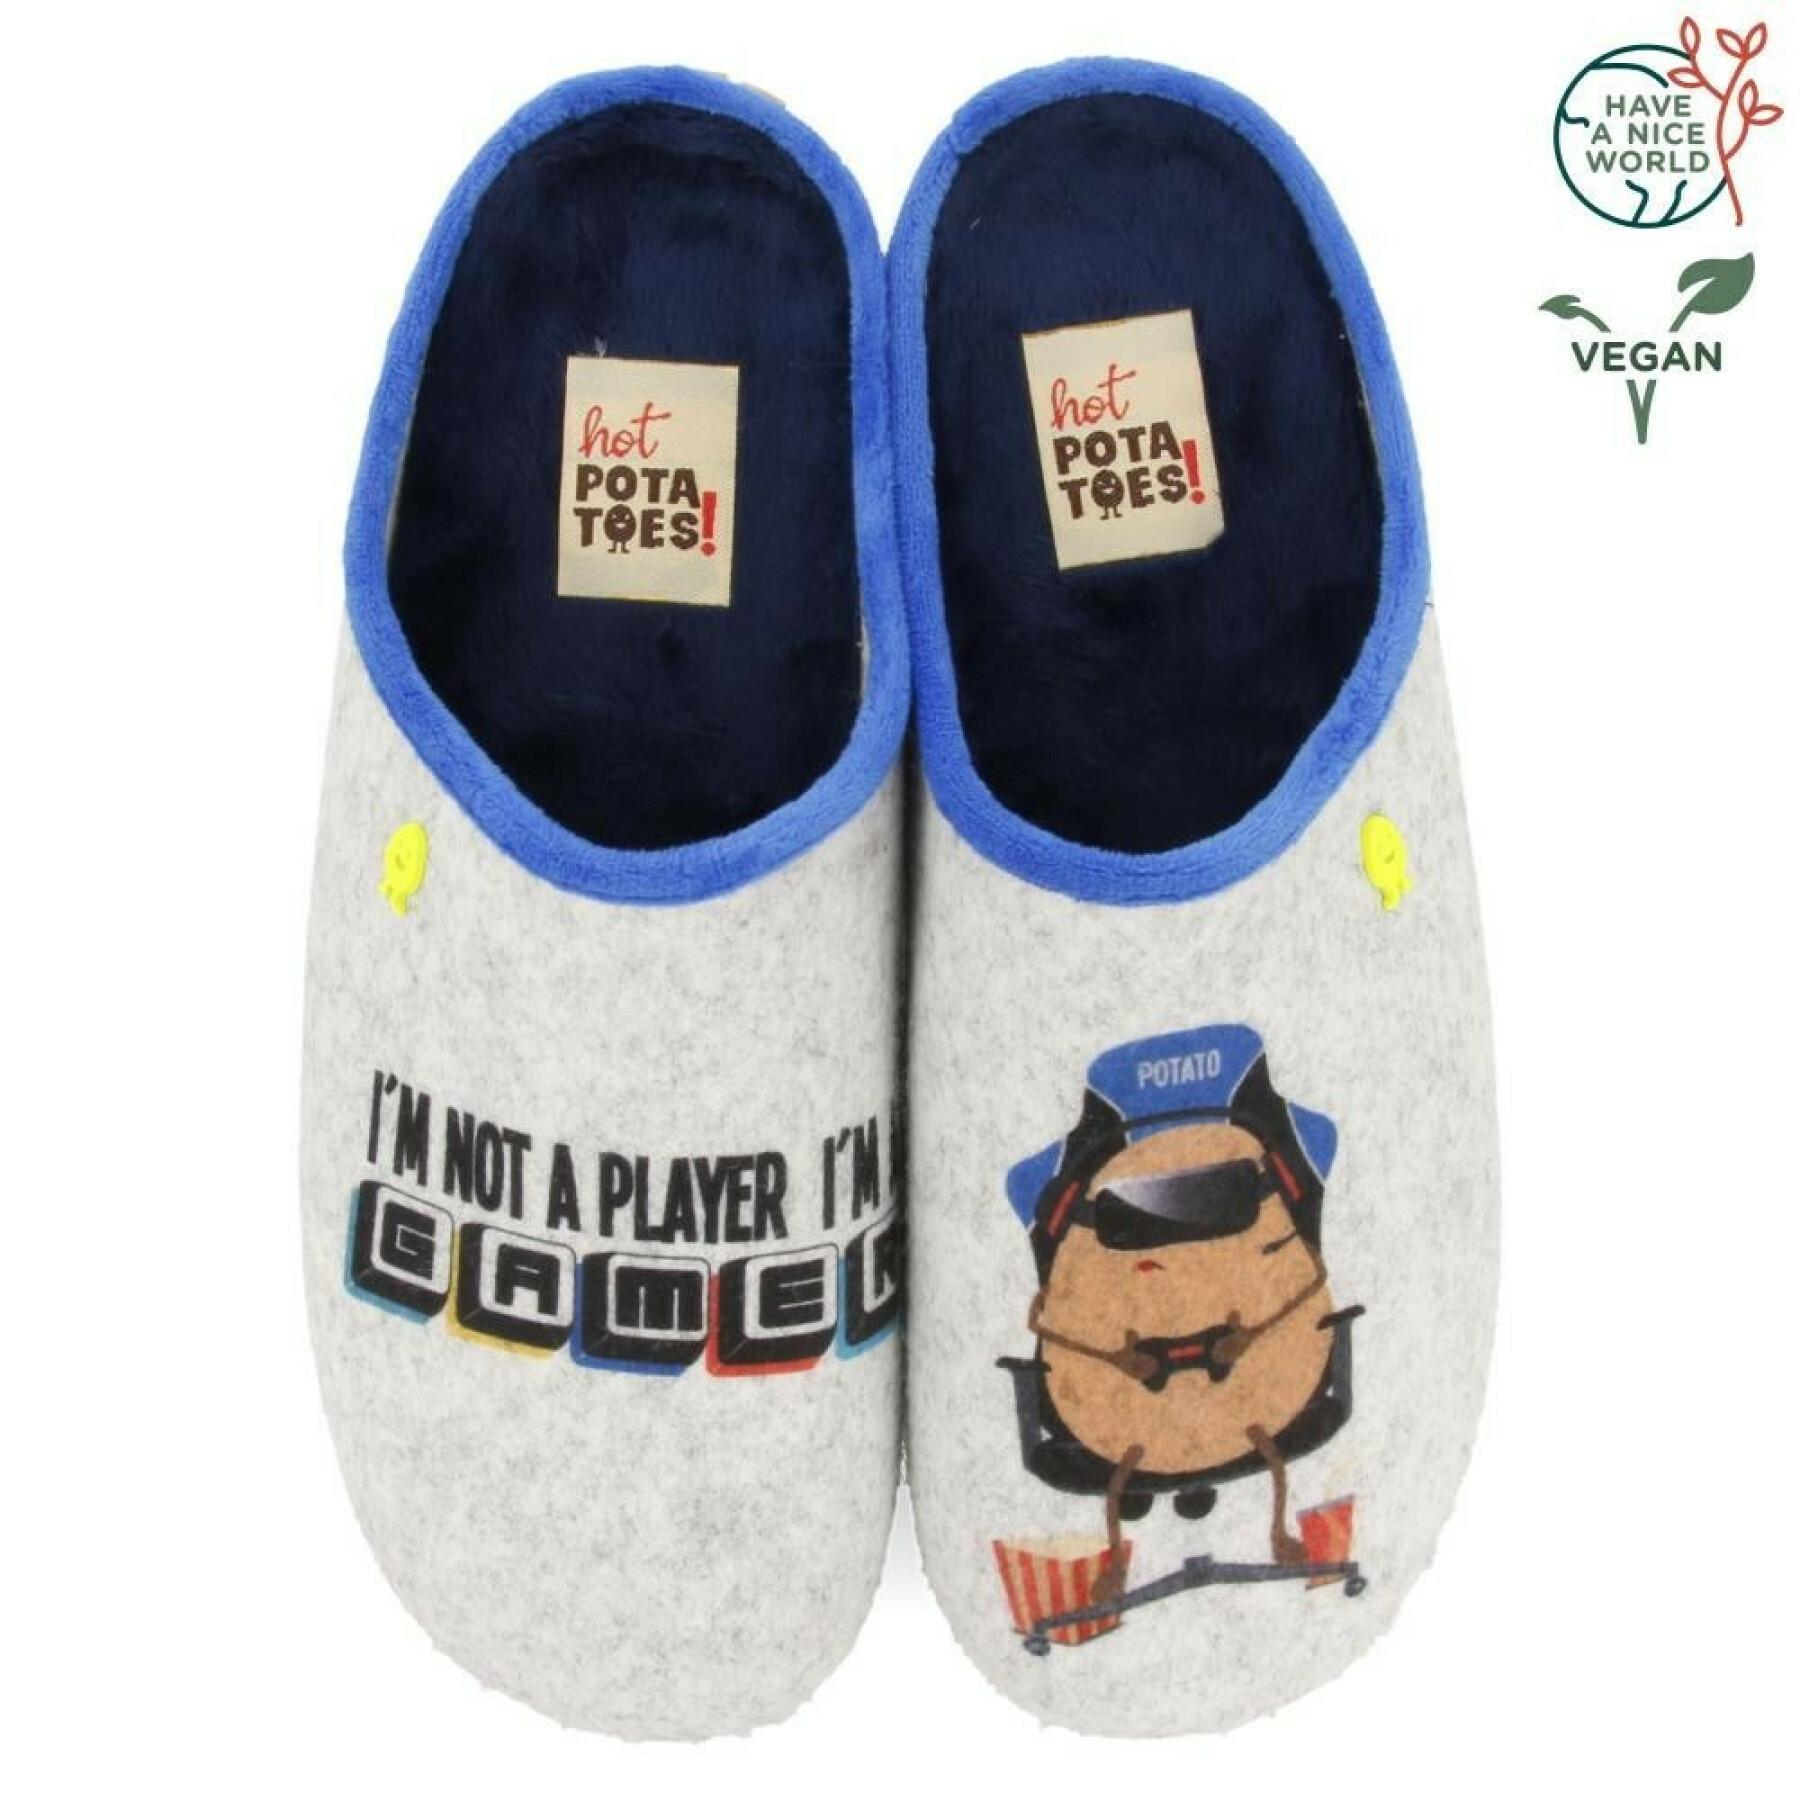 Slippers from the collection Hot Potatoes absarn